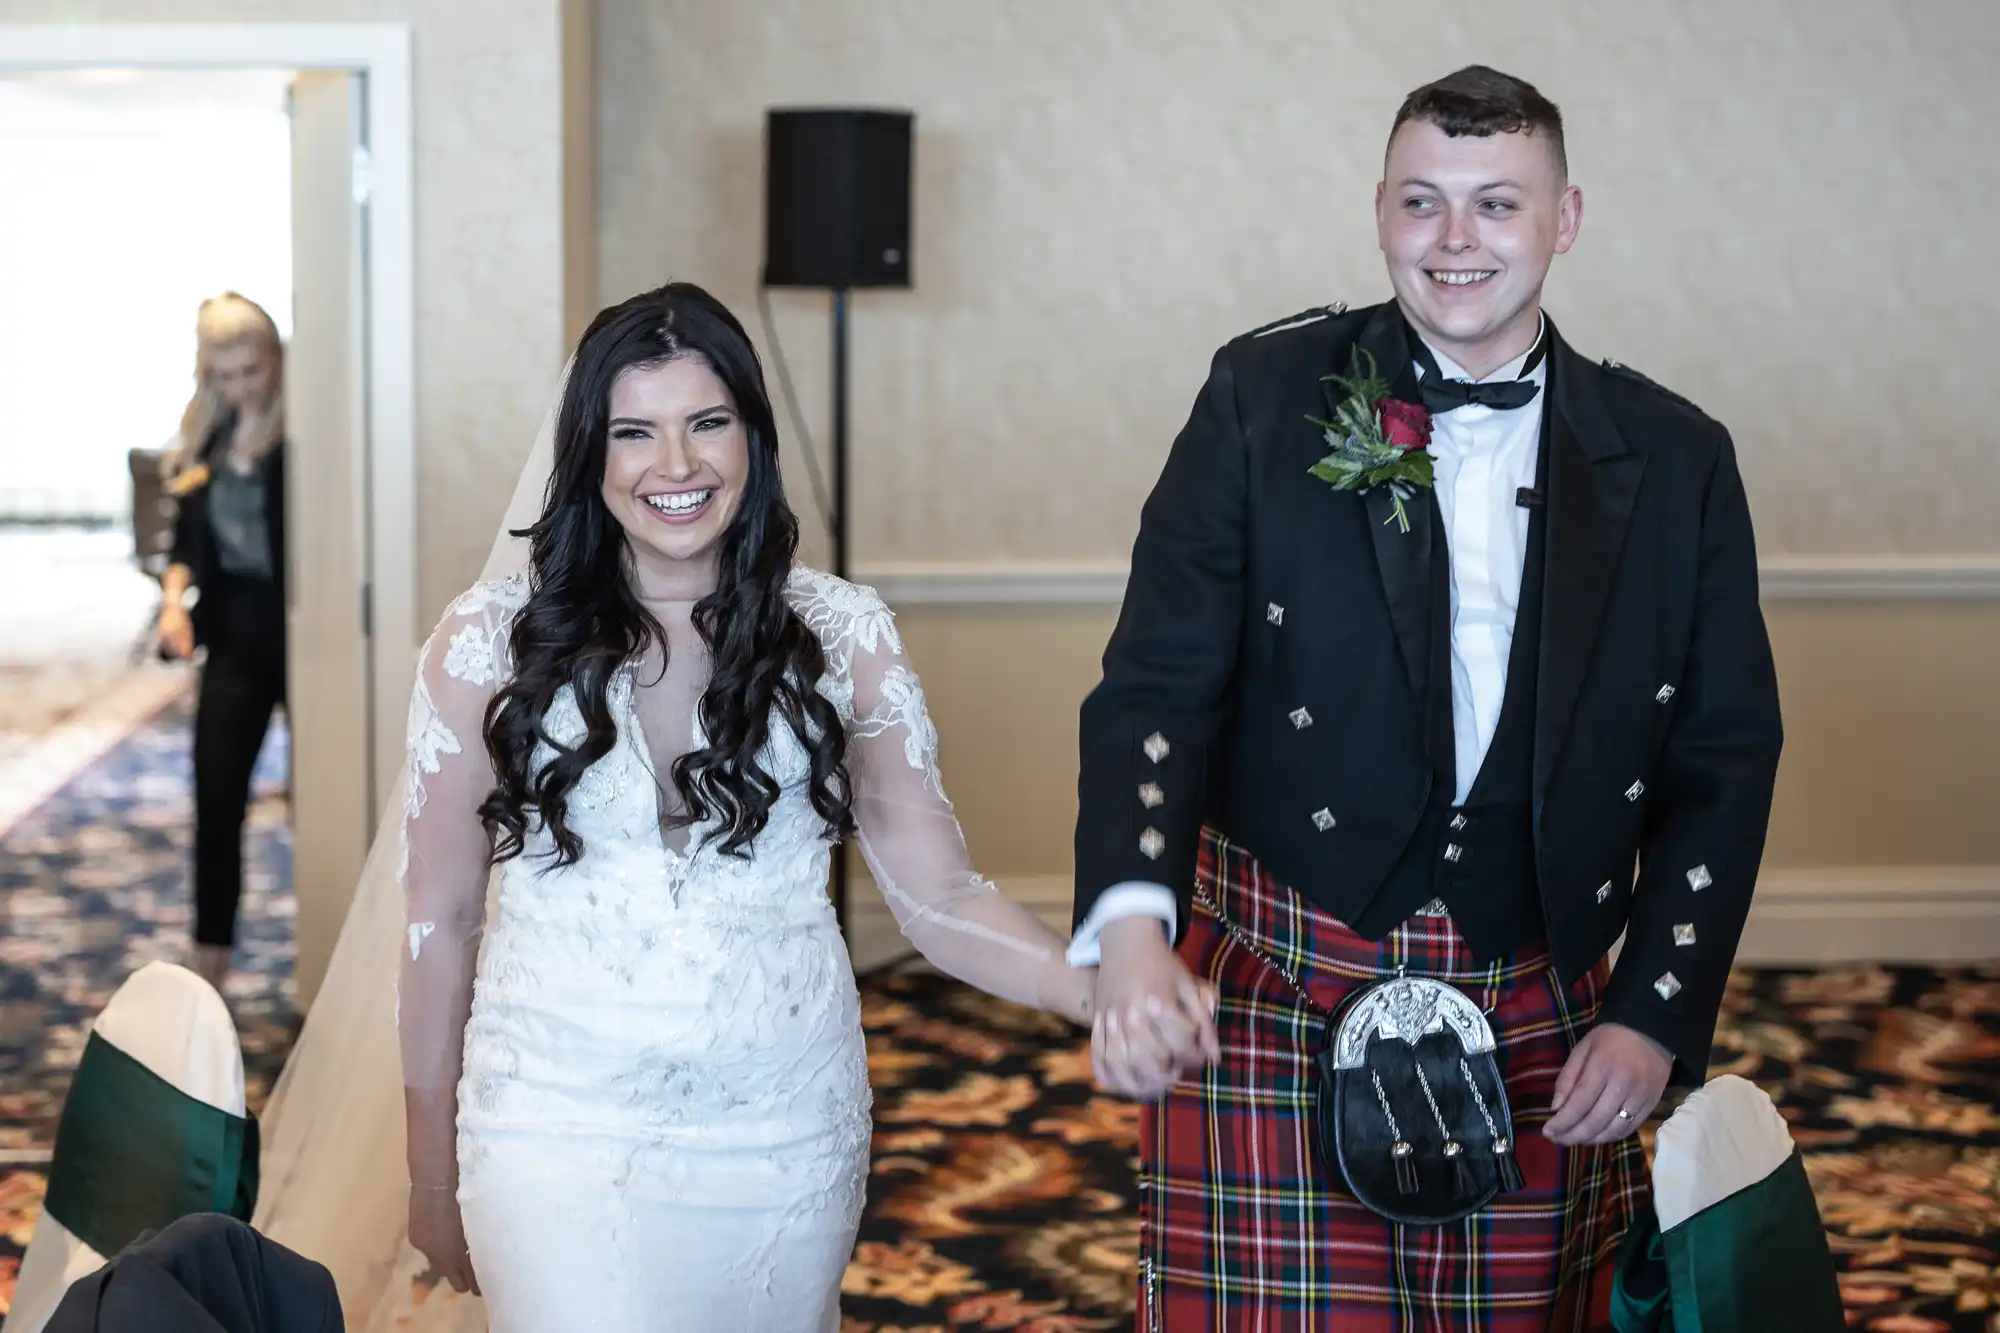 A bride in a lace dress and a groom in a traditional kilt smiling as they walk hand in hand through a wedding venue.